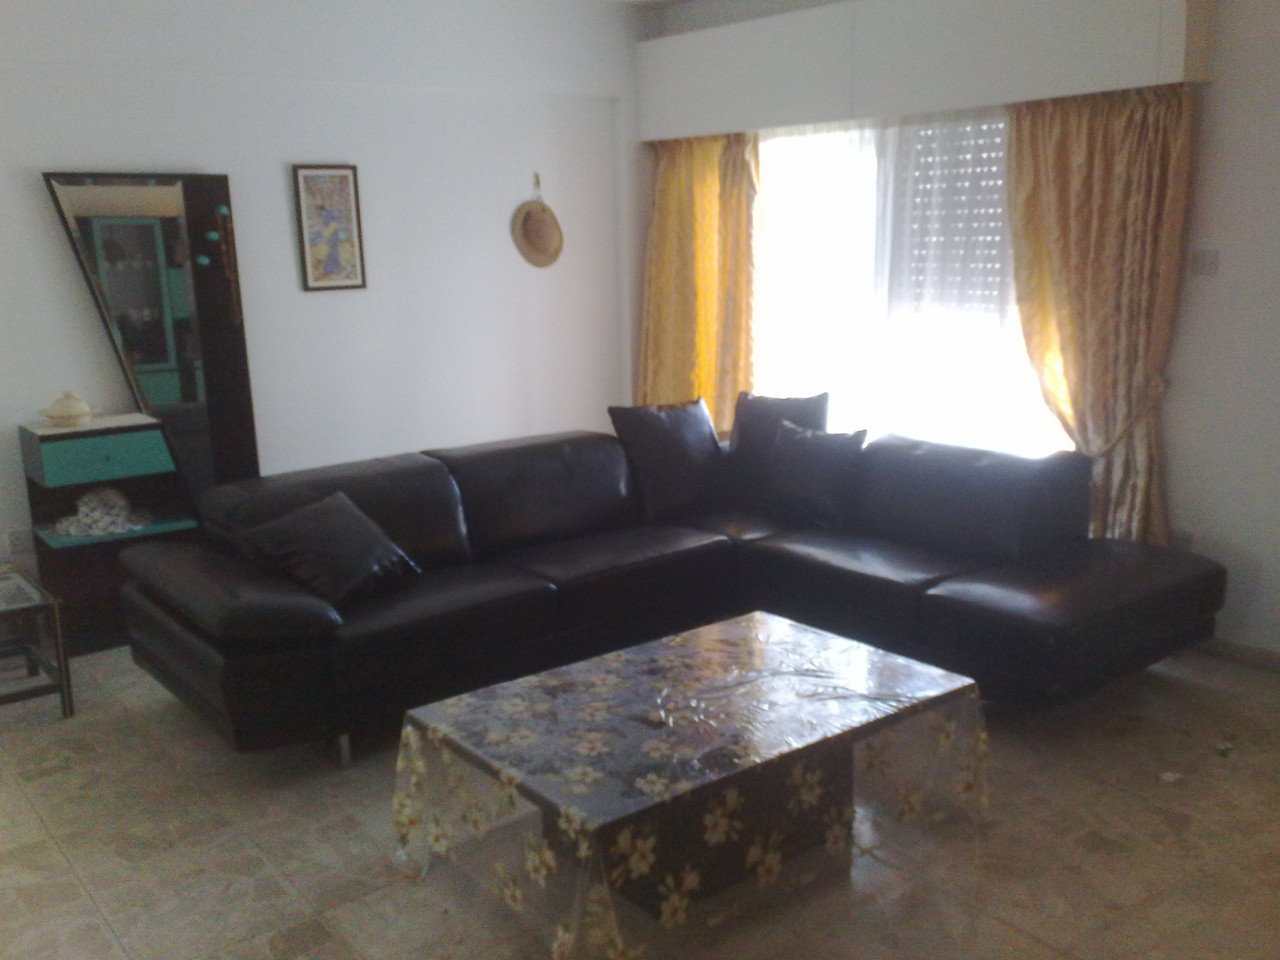 Property for Rent: Apartment (Flat) in Neapoli, Limassol for Rent | Key Realtor Cyprus